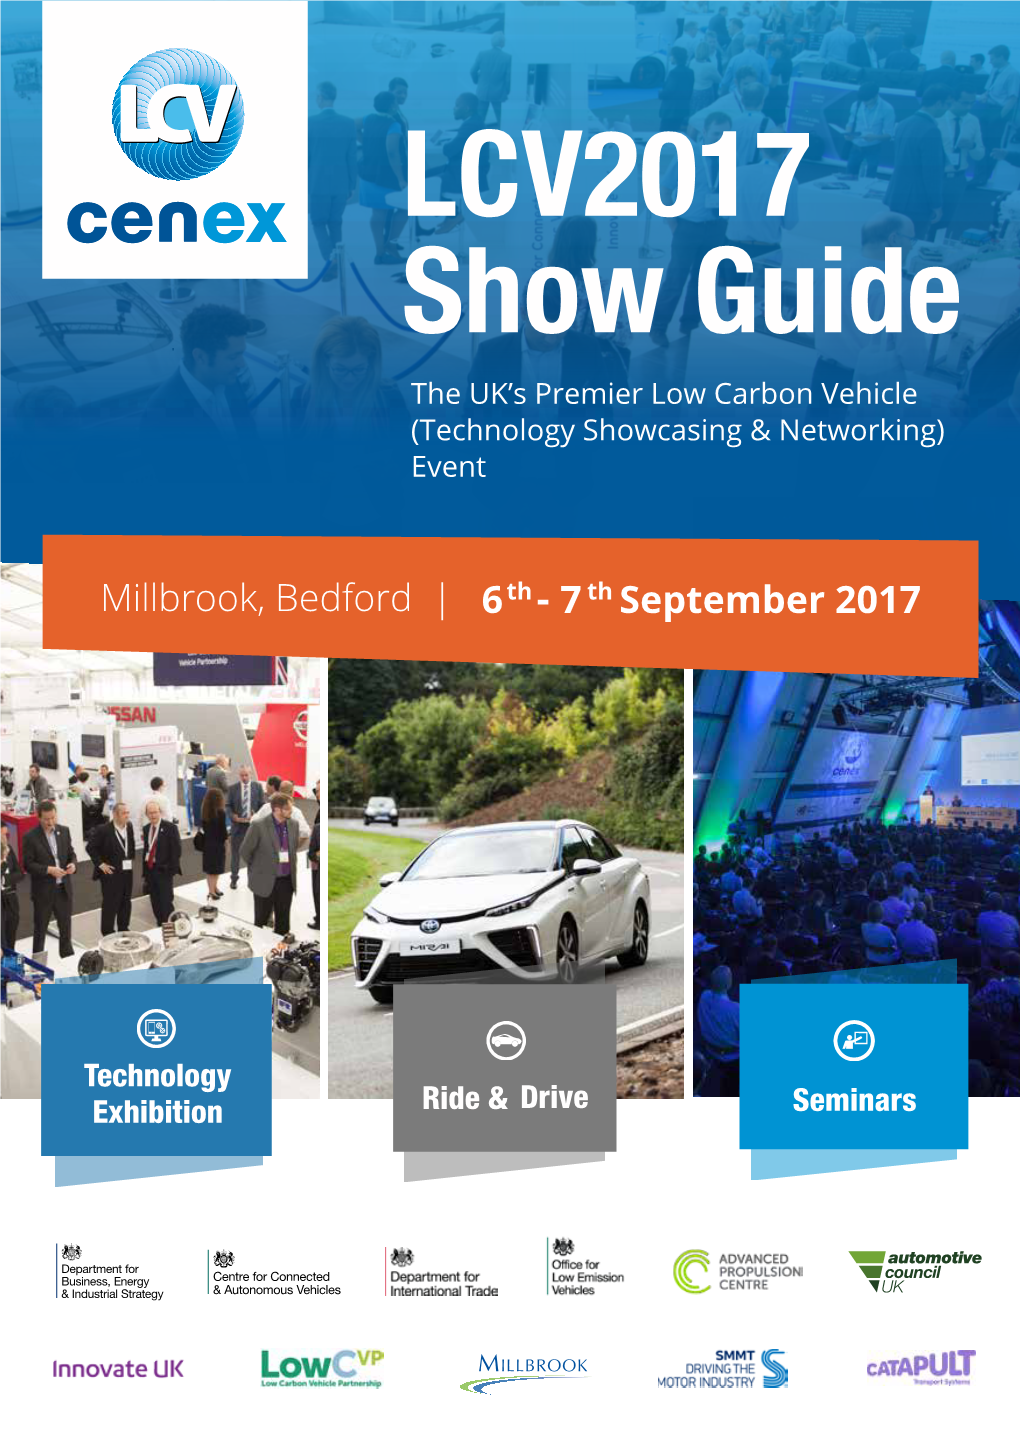 LCV2017 Show Guide the UK’S Premier Low Carbon Vehicle (Technology Showcasing & Networking) Event